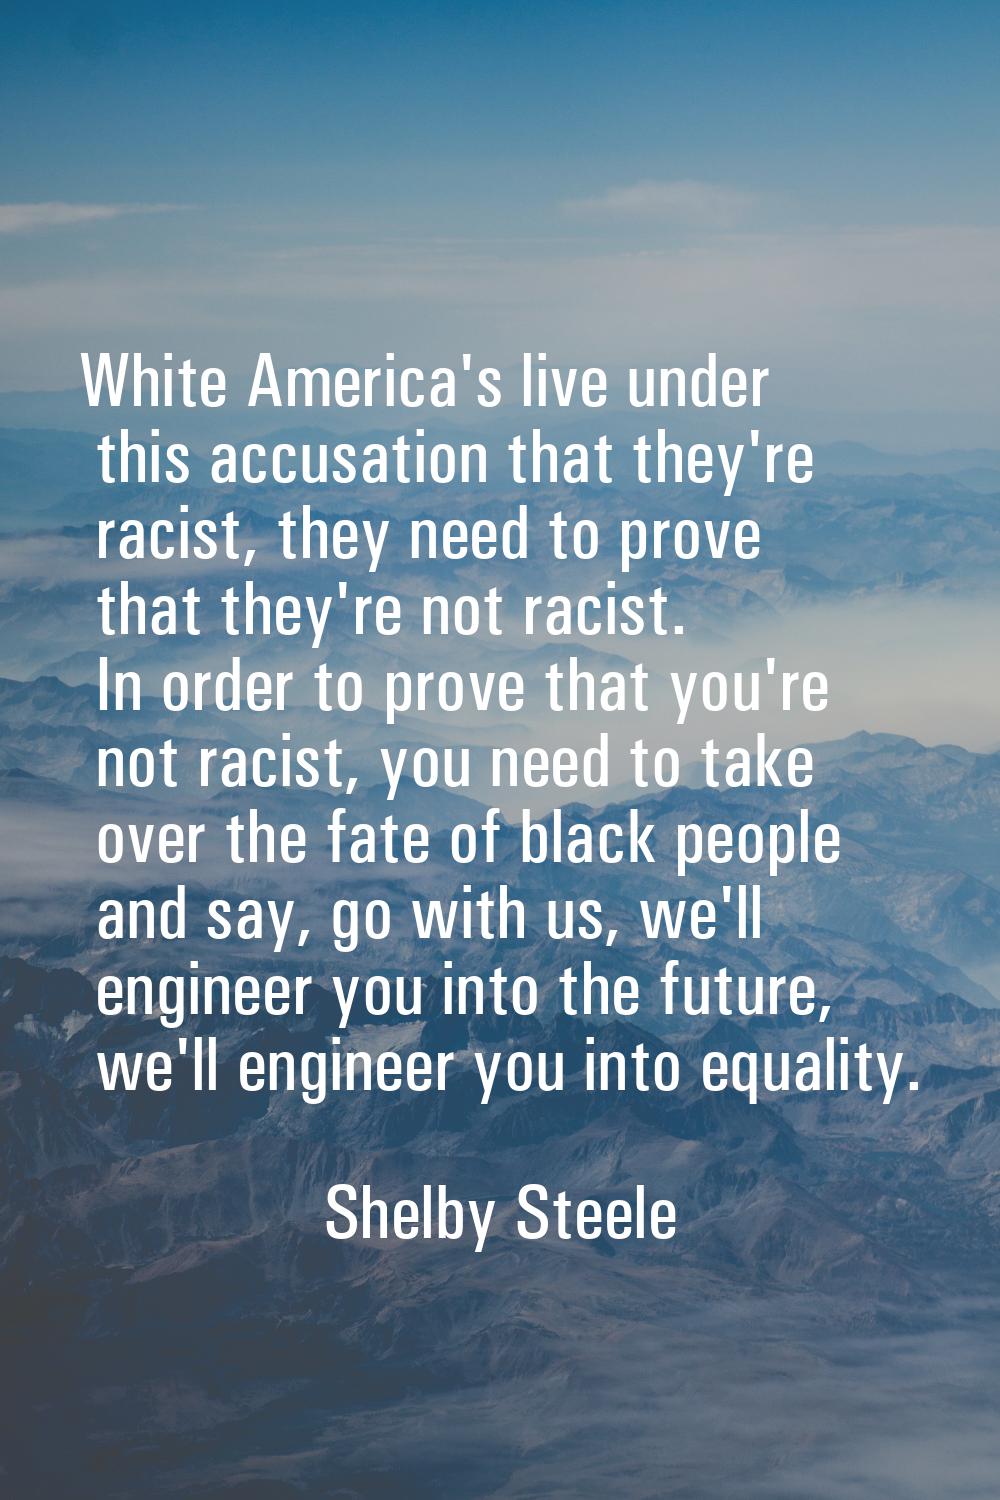 White America's live under this accusation that they're racist, they need to prove that they're not